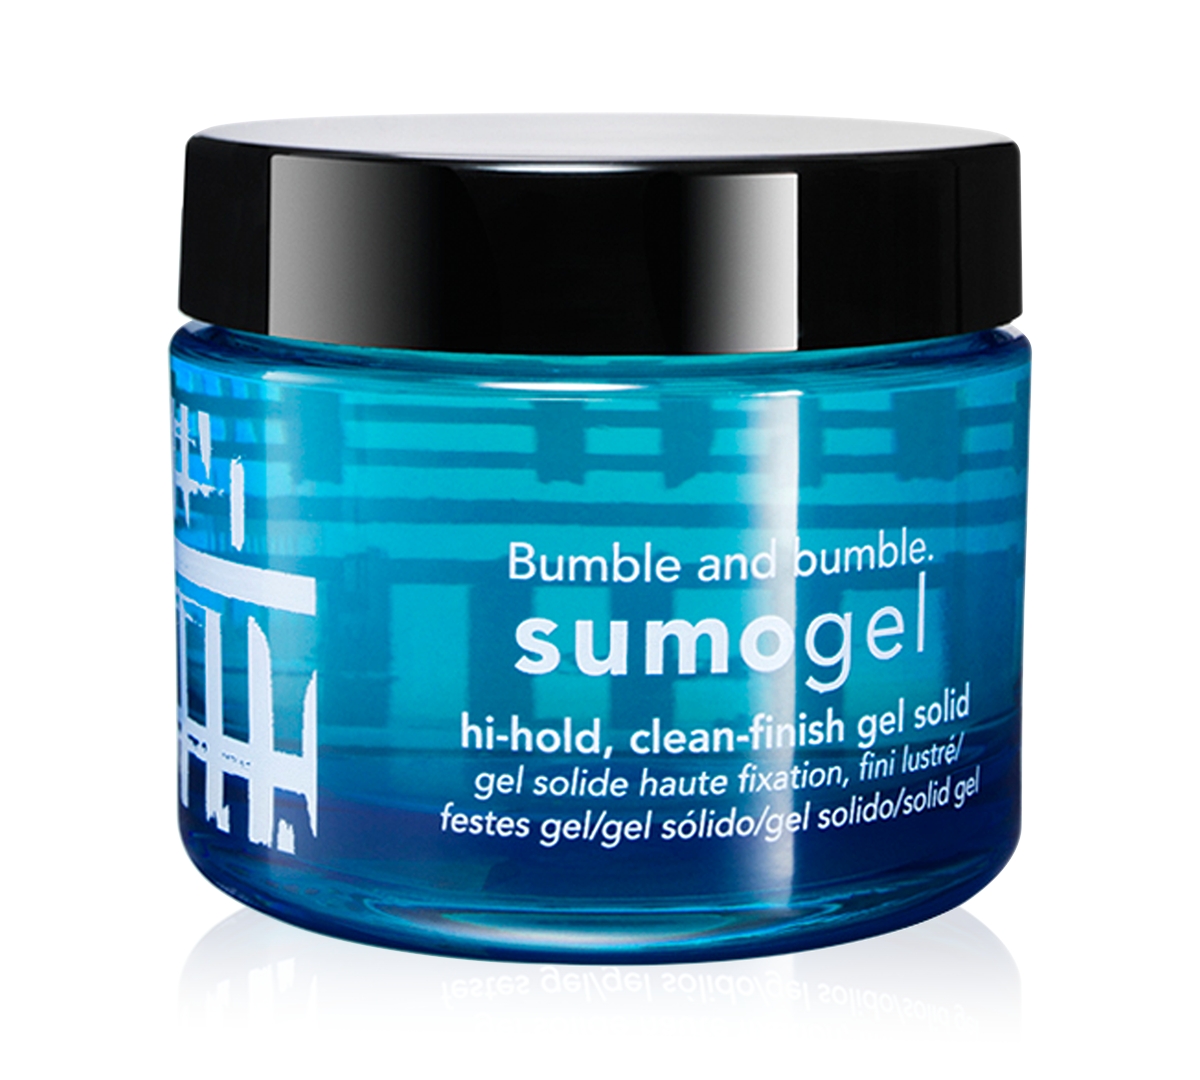 Bumble And Bumble Sumogel, 1.5oz. In No Color